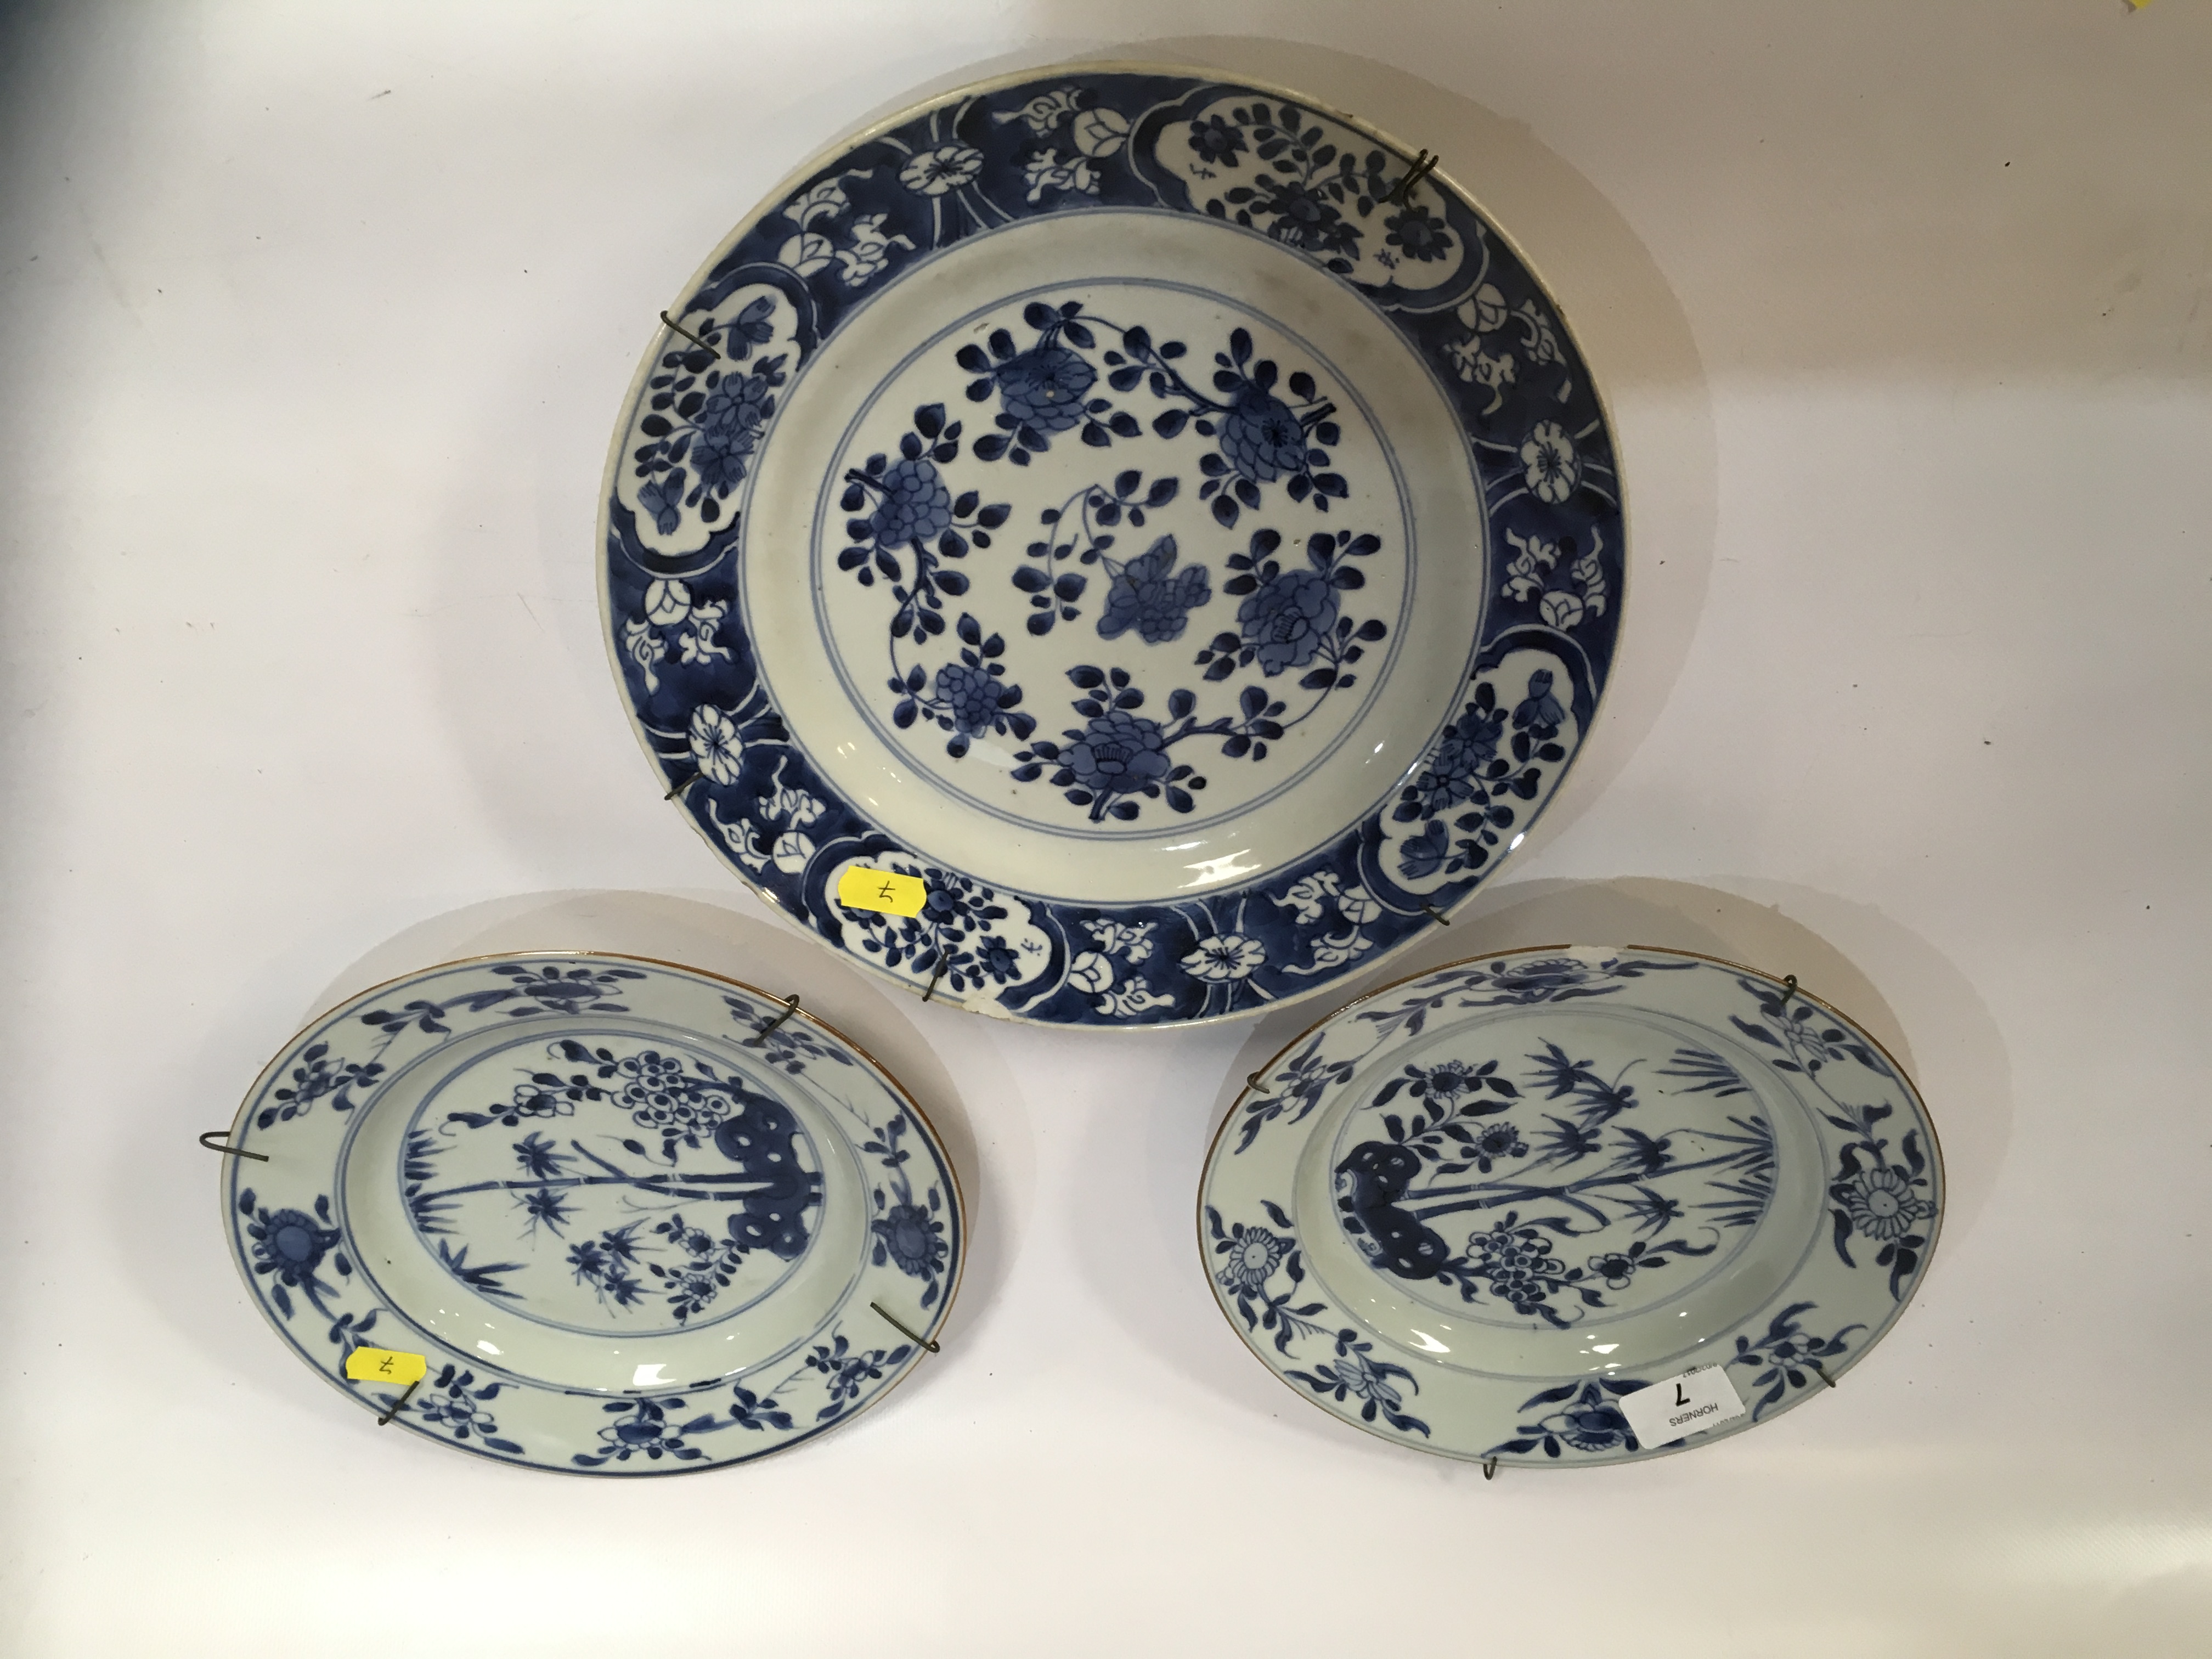 PAIR QIANLONG BLUE AND WHITE PLATES DECORATED WITH BAMBOO AND FLOWERS (ONE CHIPPED) ALONG WITH BLUE